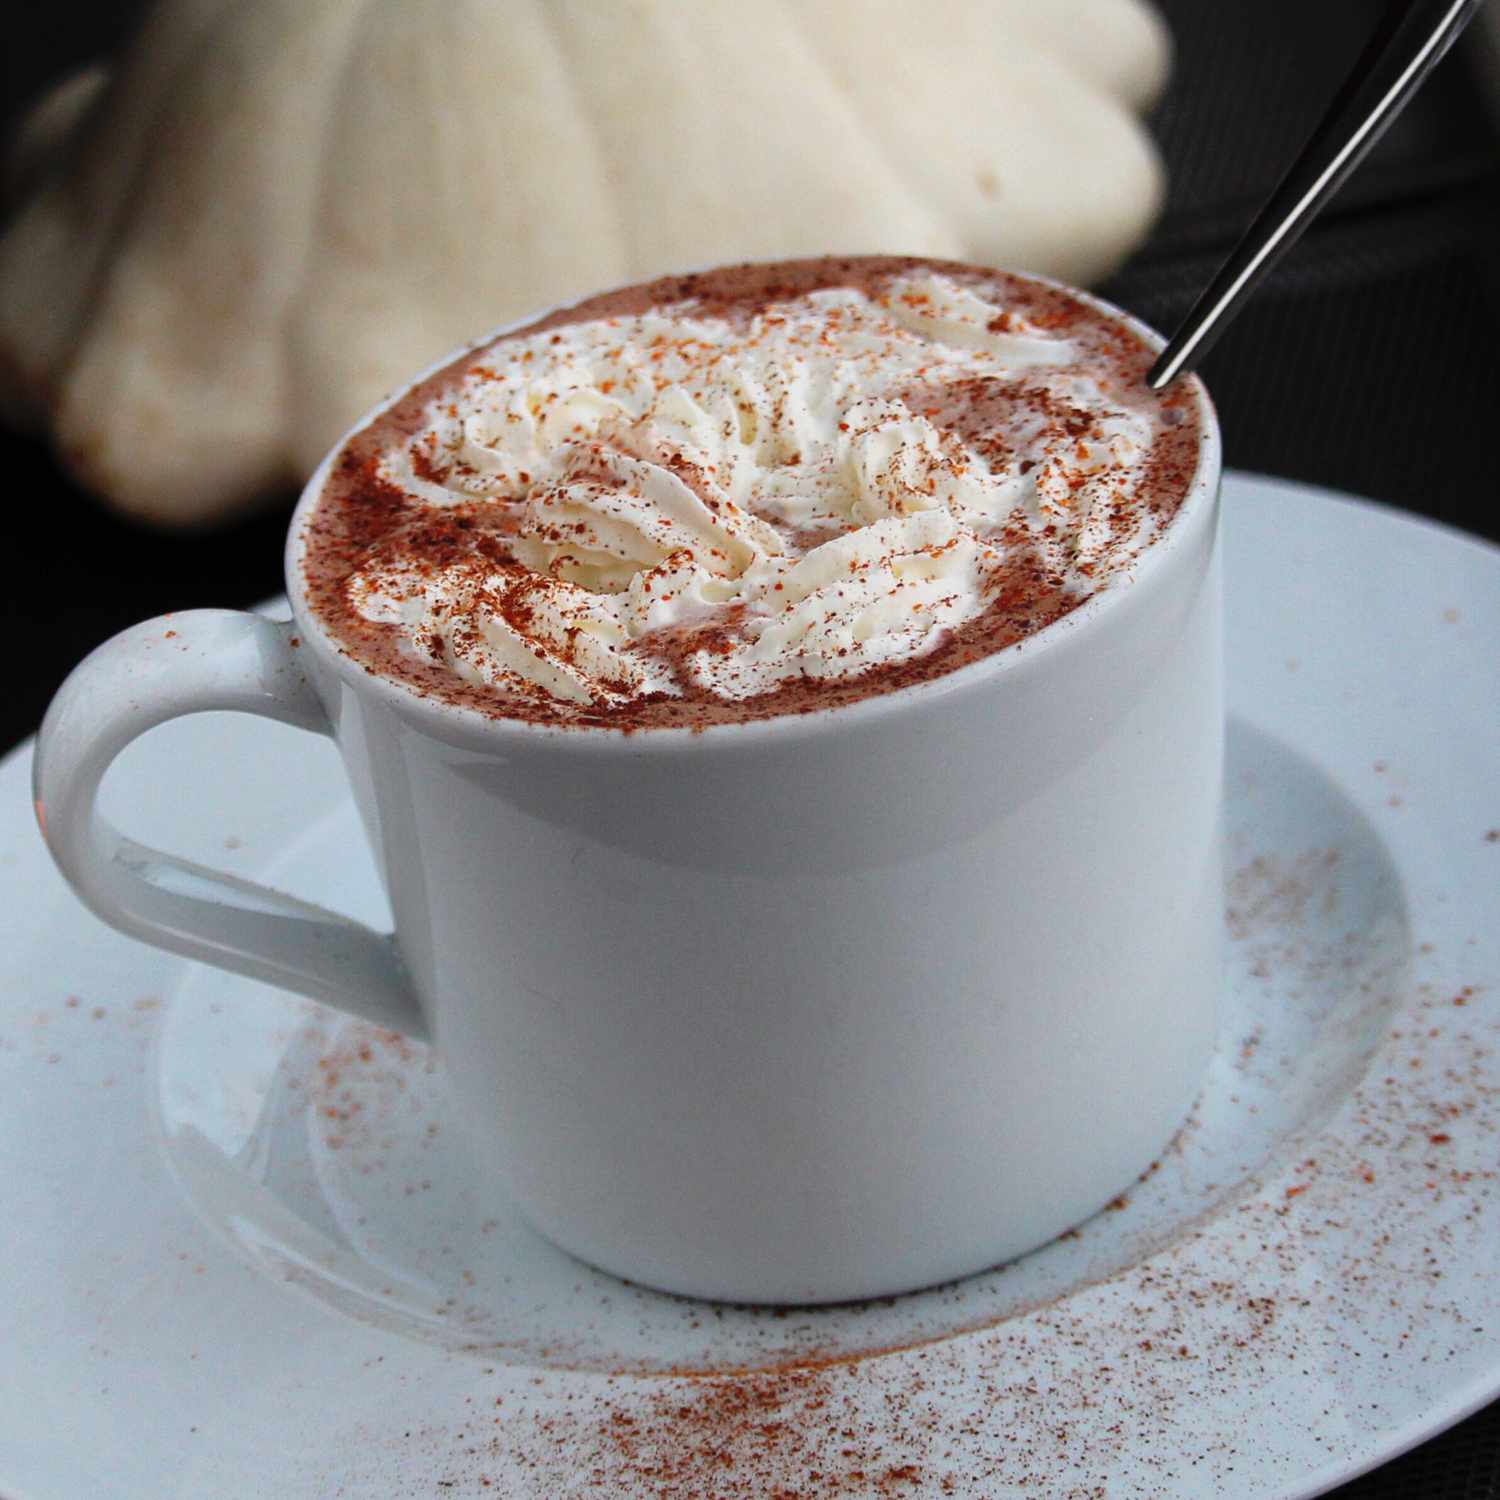 a mug of whipped cream and cinnamon-topped hot chocolate on a white plate